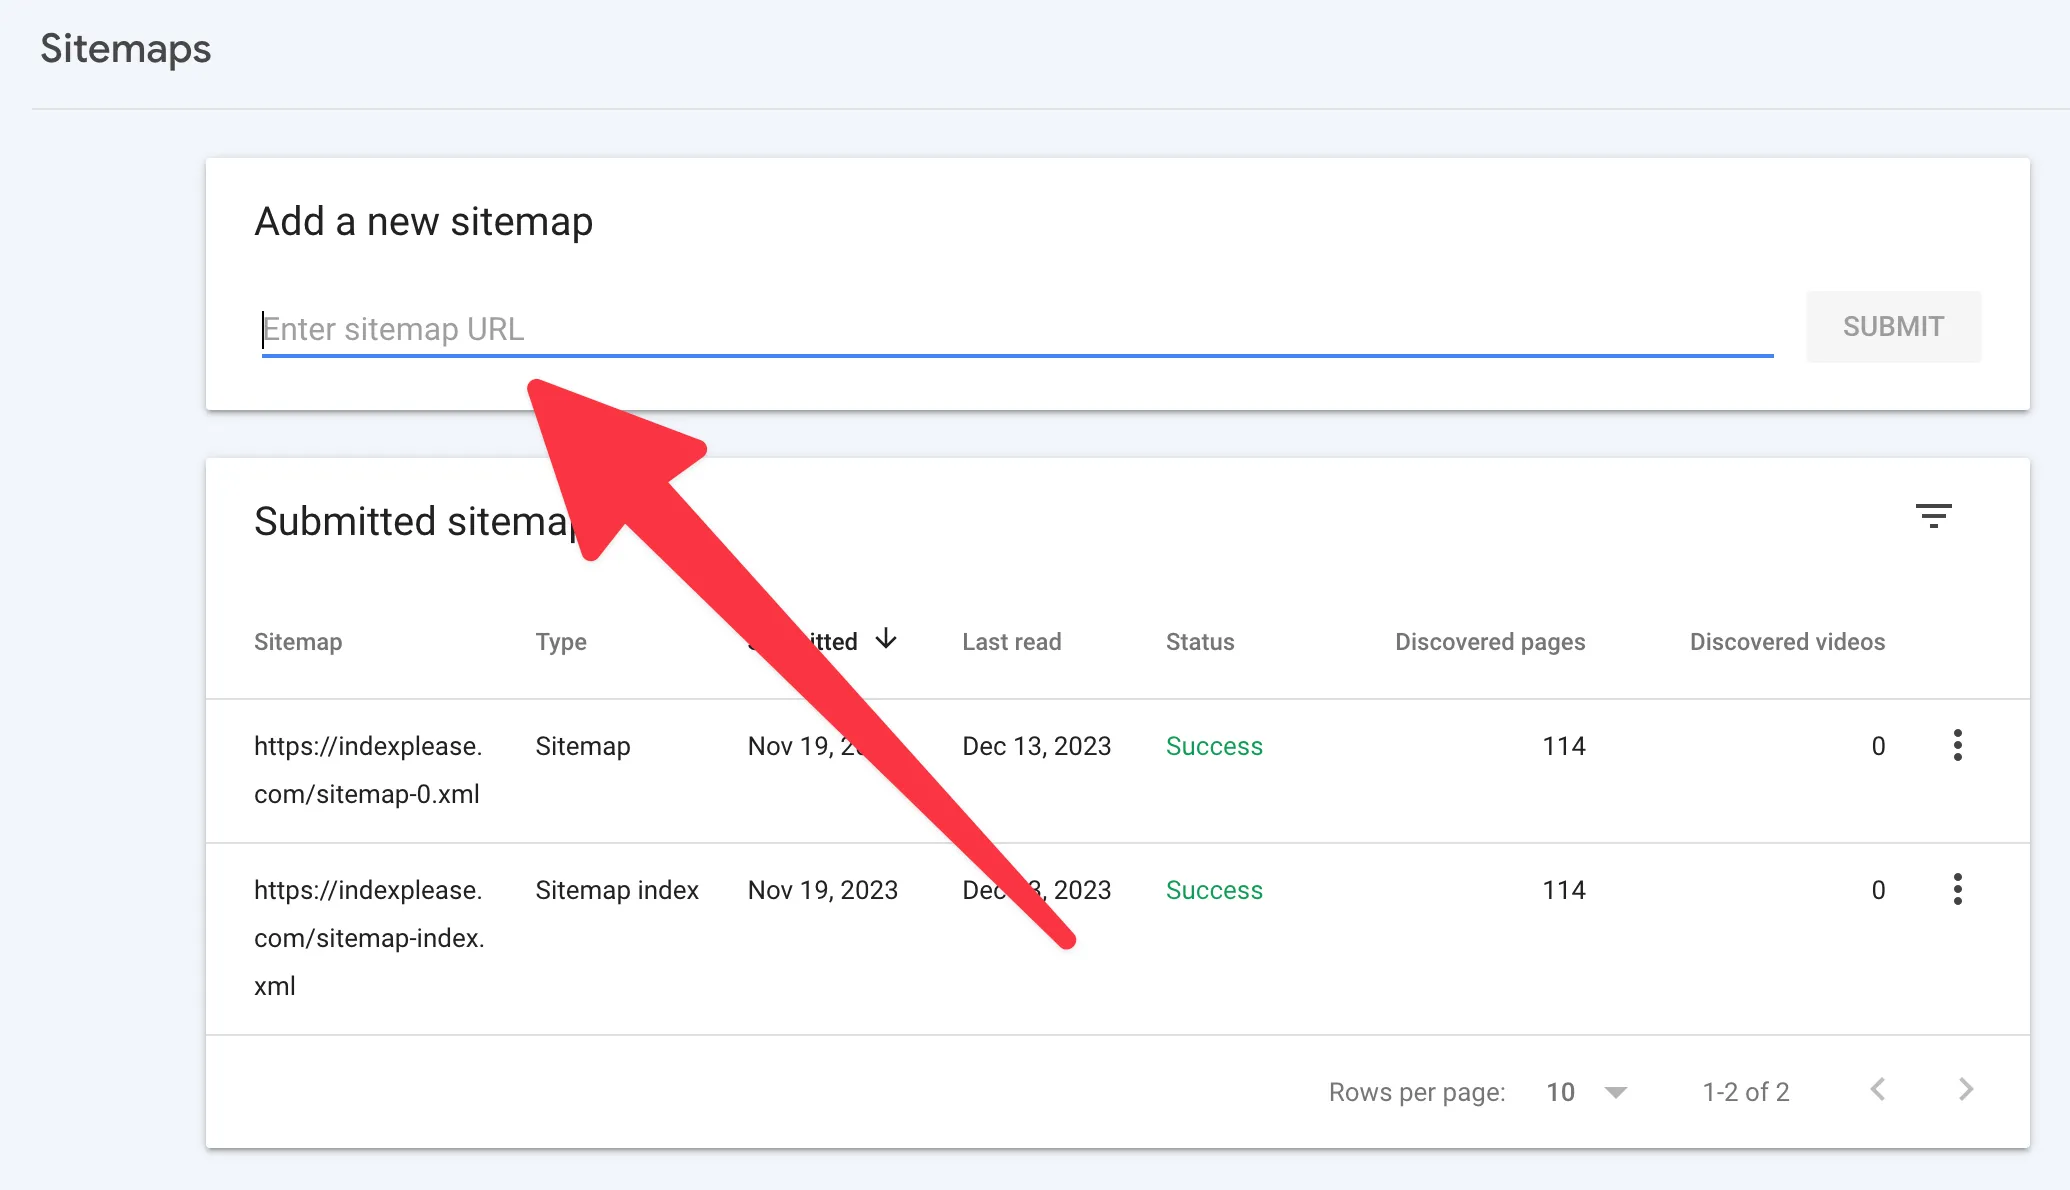 Submit sitemap to Google Search Console